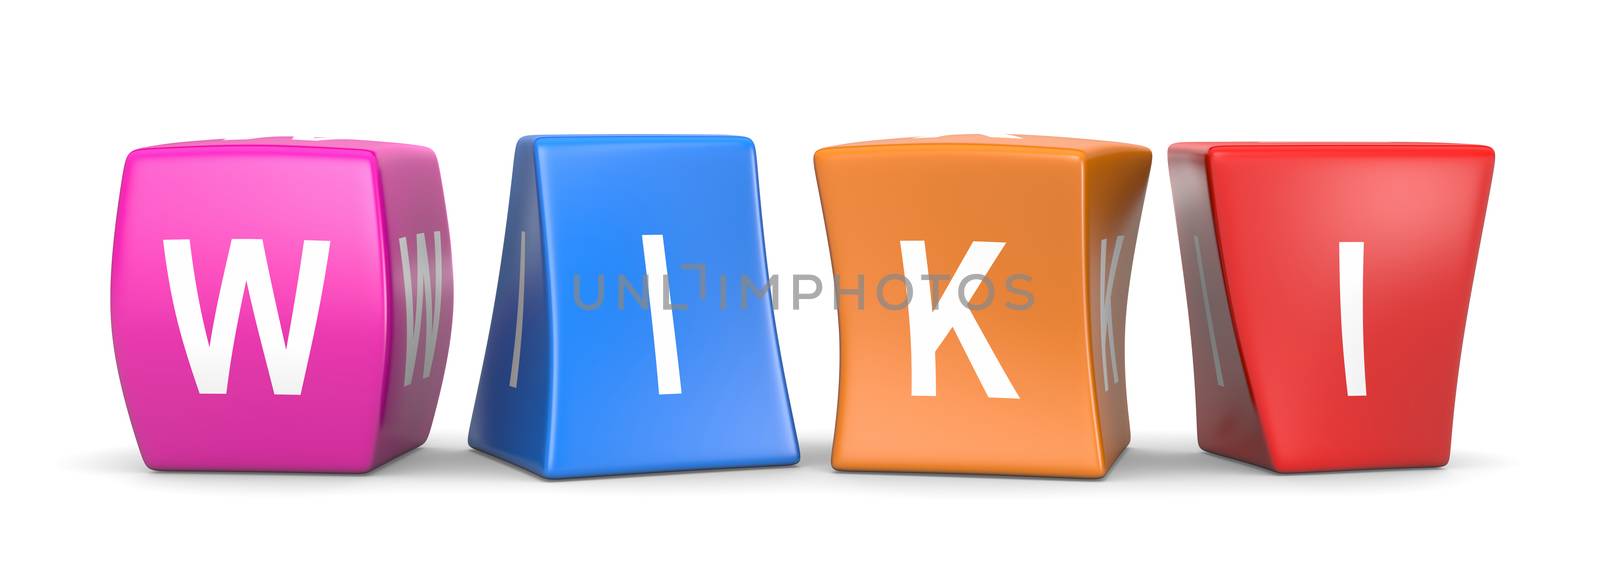 Wiki Funny Cubes by make